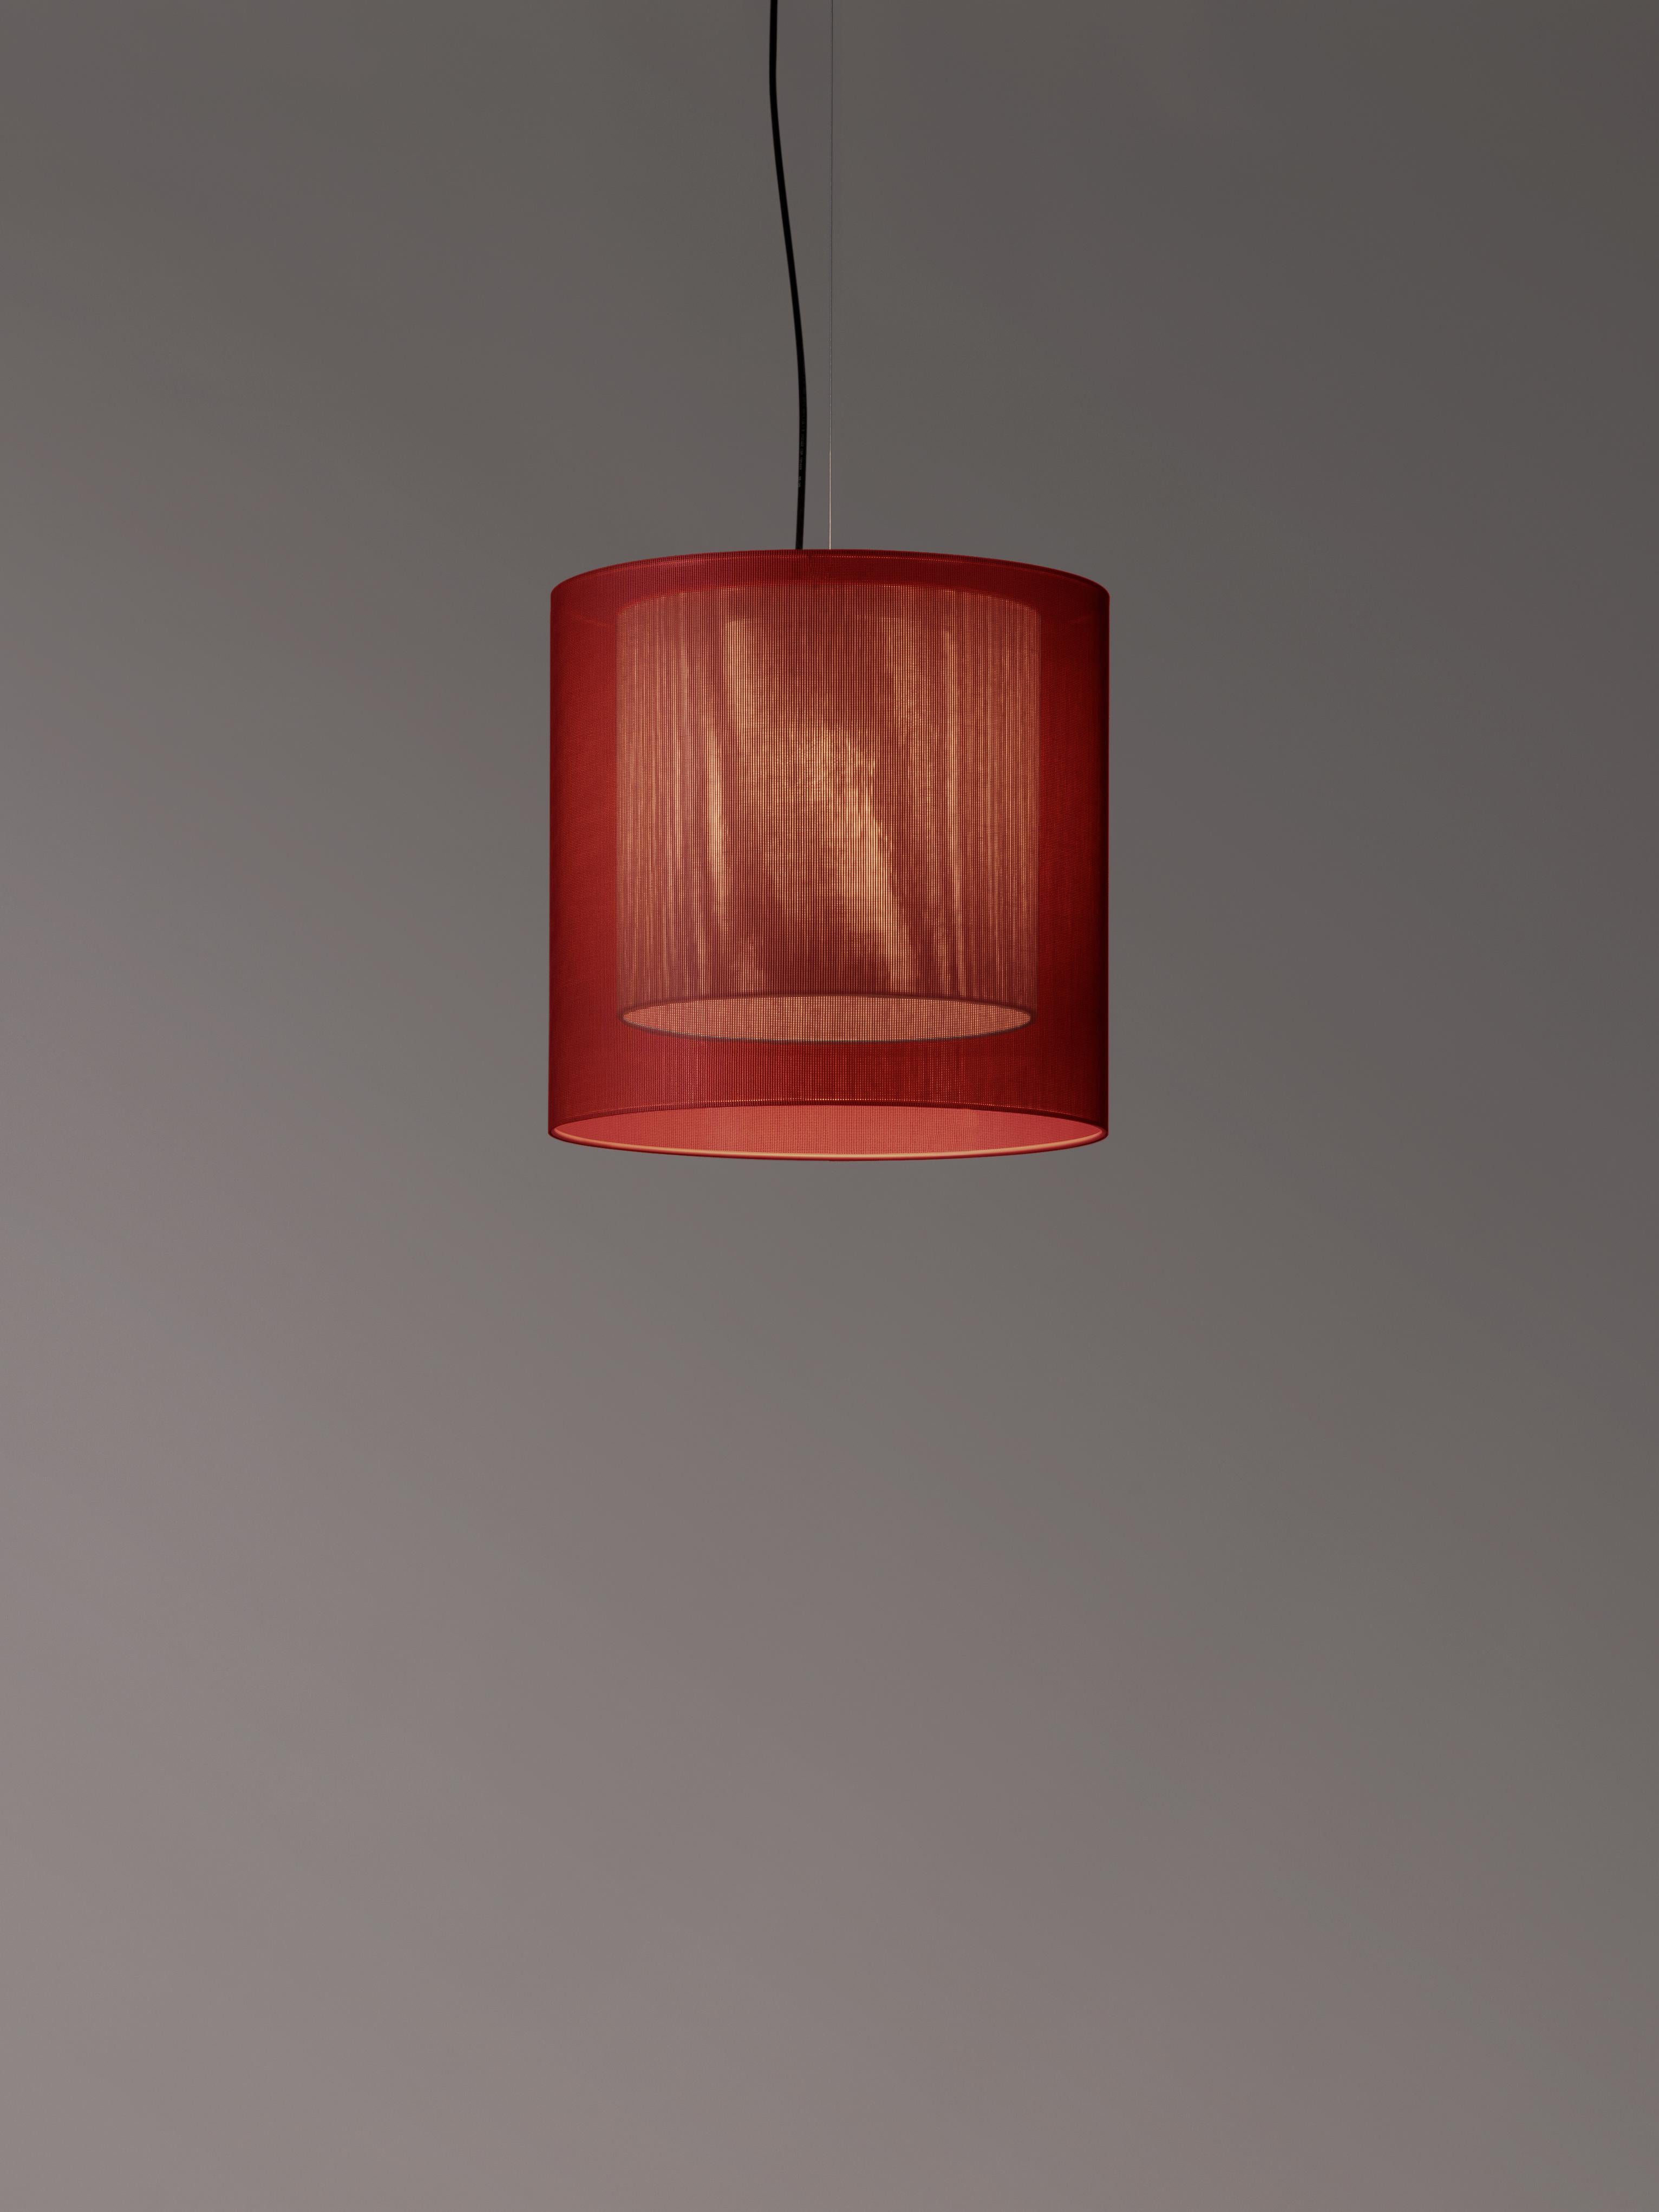 Red and grey Moaré MS pendant lamp by Antoni Arola
Dimensions: D 46 x H 45 cm
Materials: Metal, polyester.
Available in other colors and sizes.

Moaré’s multiple combinations of formats and colours make it highly versatile. The series takes its name